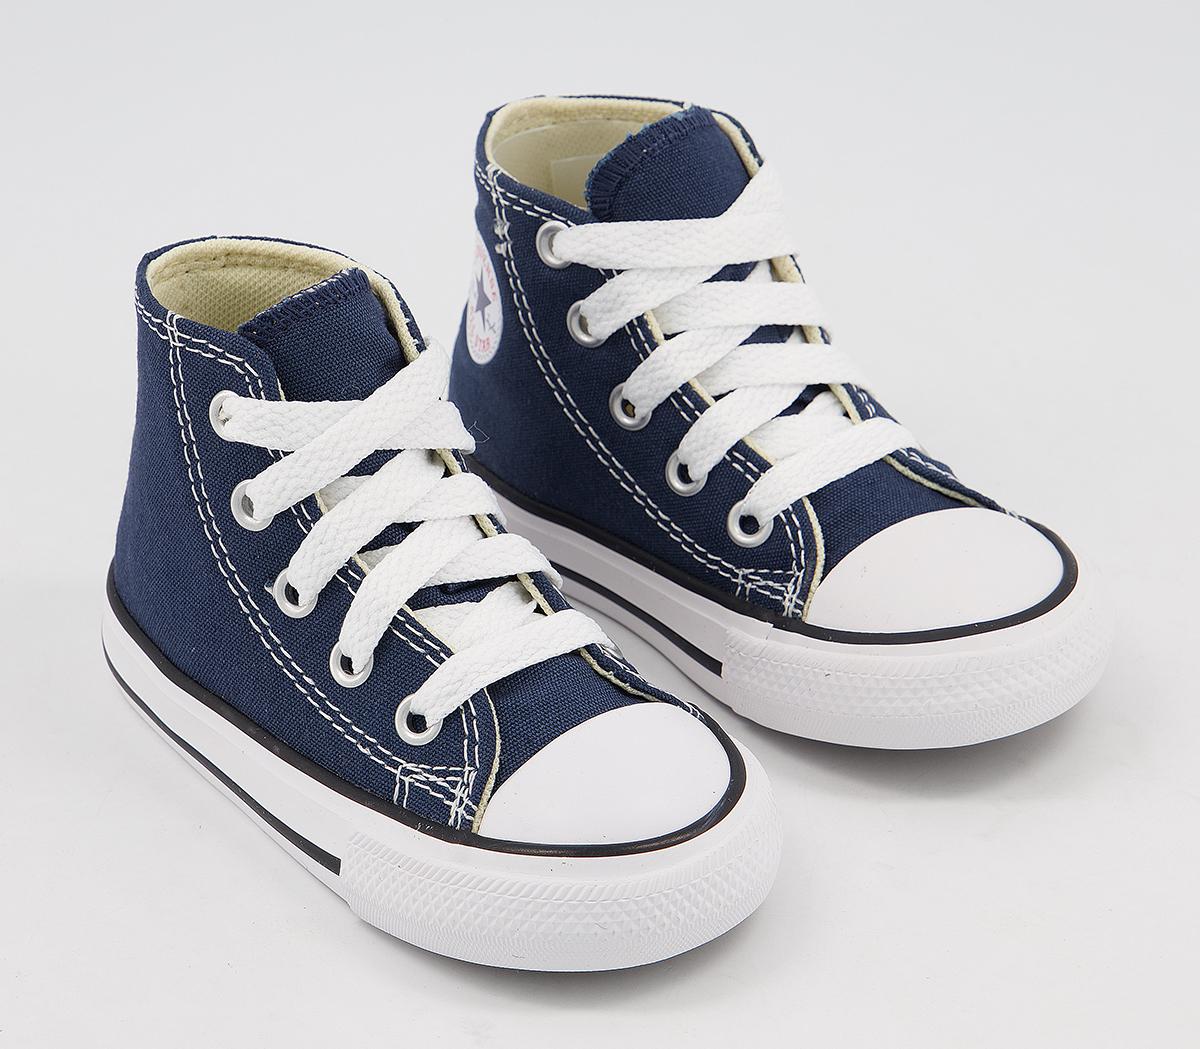 Kids Converse Baby Boys Small Star Hi Canvas In Navy Blue And White, 3 Infant